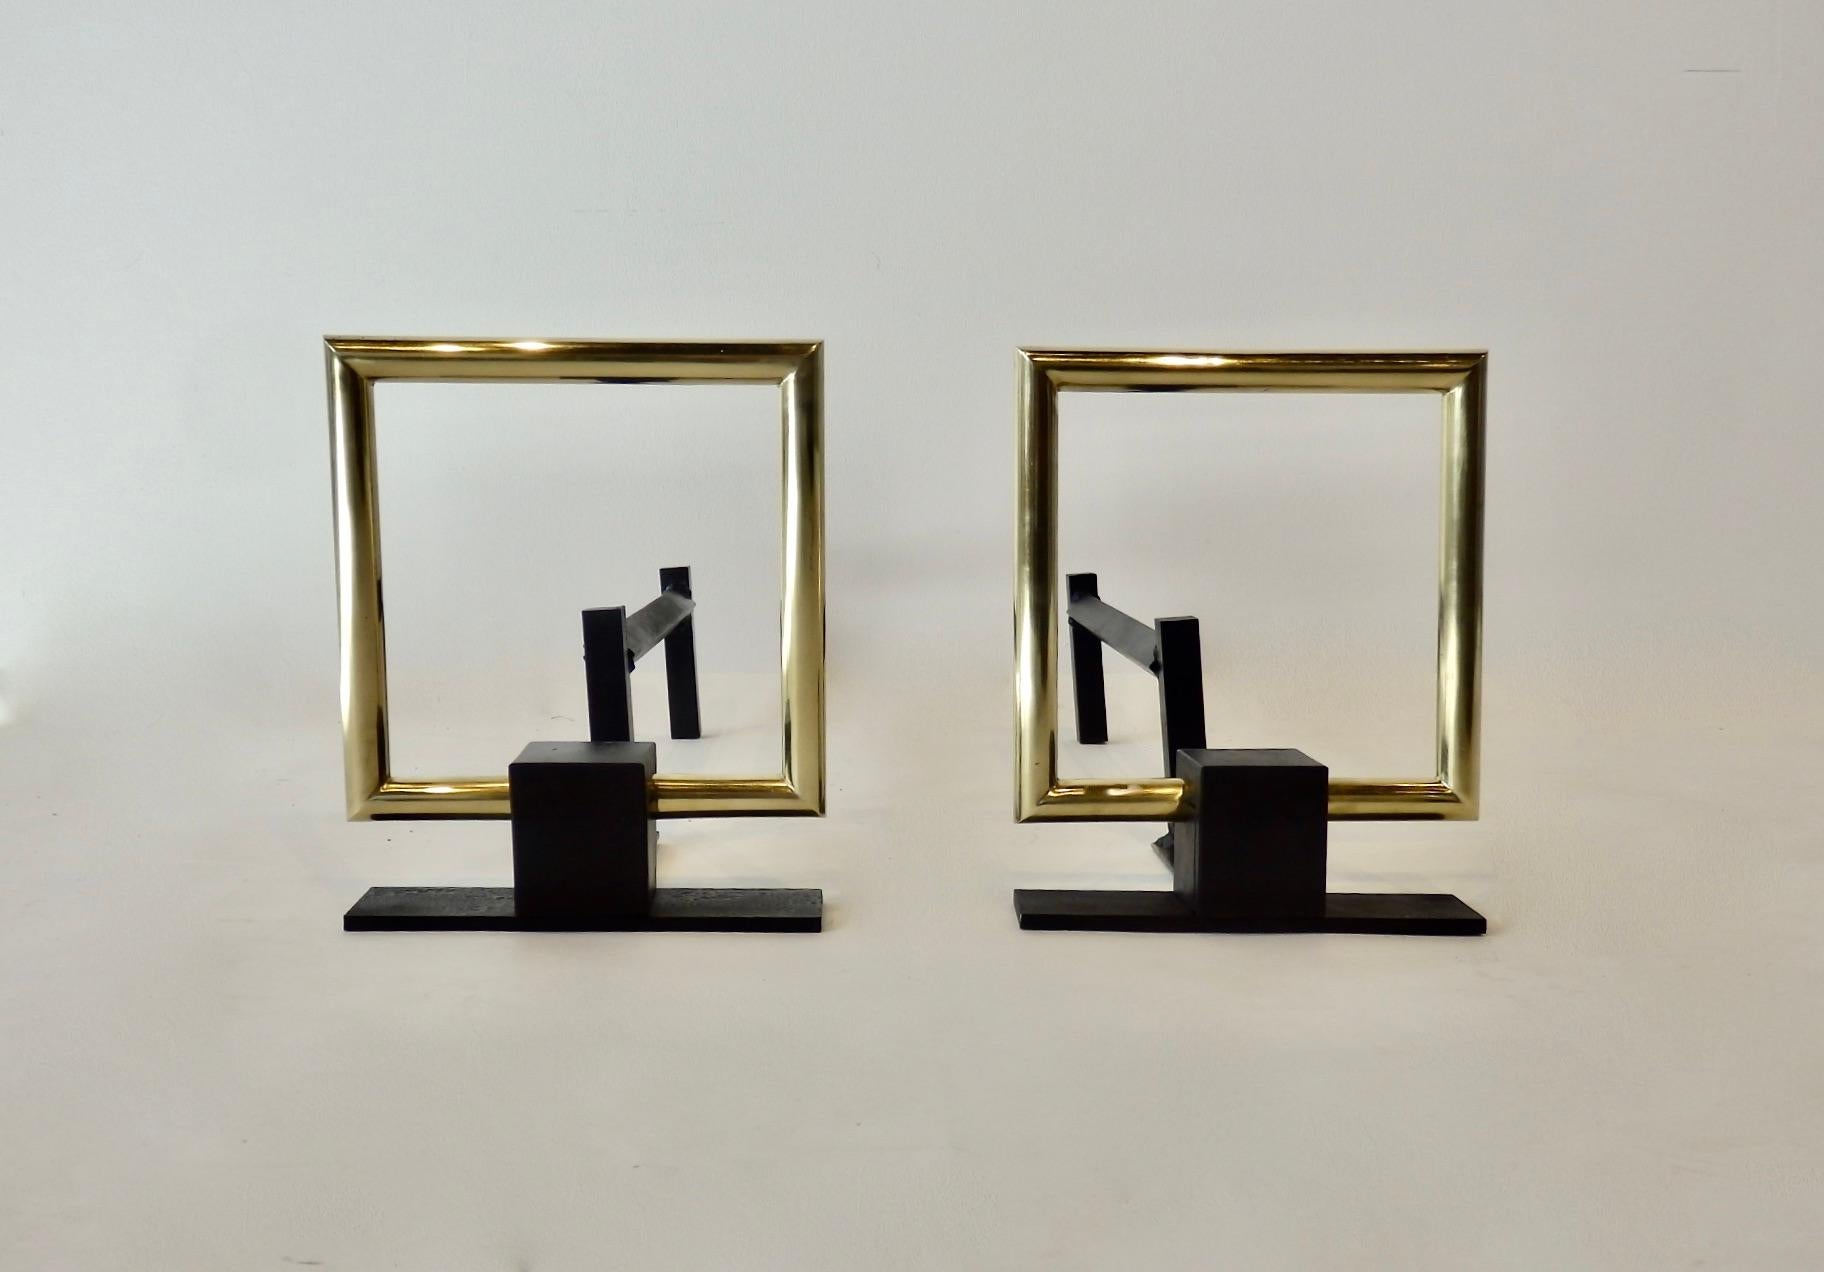 Art Deco styled geometric fireplace andirons. Polished brass square set in cast iron stand. Style of Donald Deskey known for so many Machine Age fireplace items. Brass square is 3/4 polished round stock measures 8 x 8. Shipped disassembled.